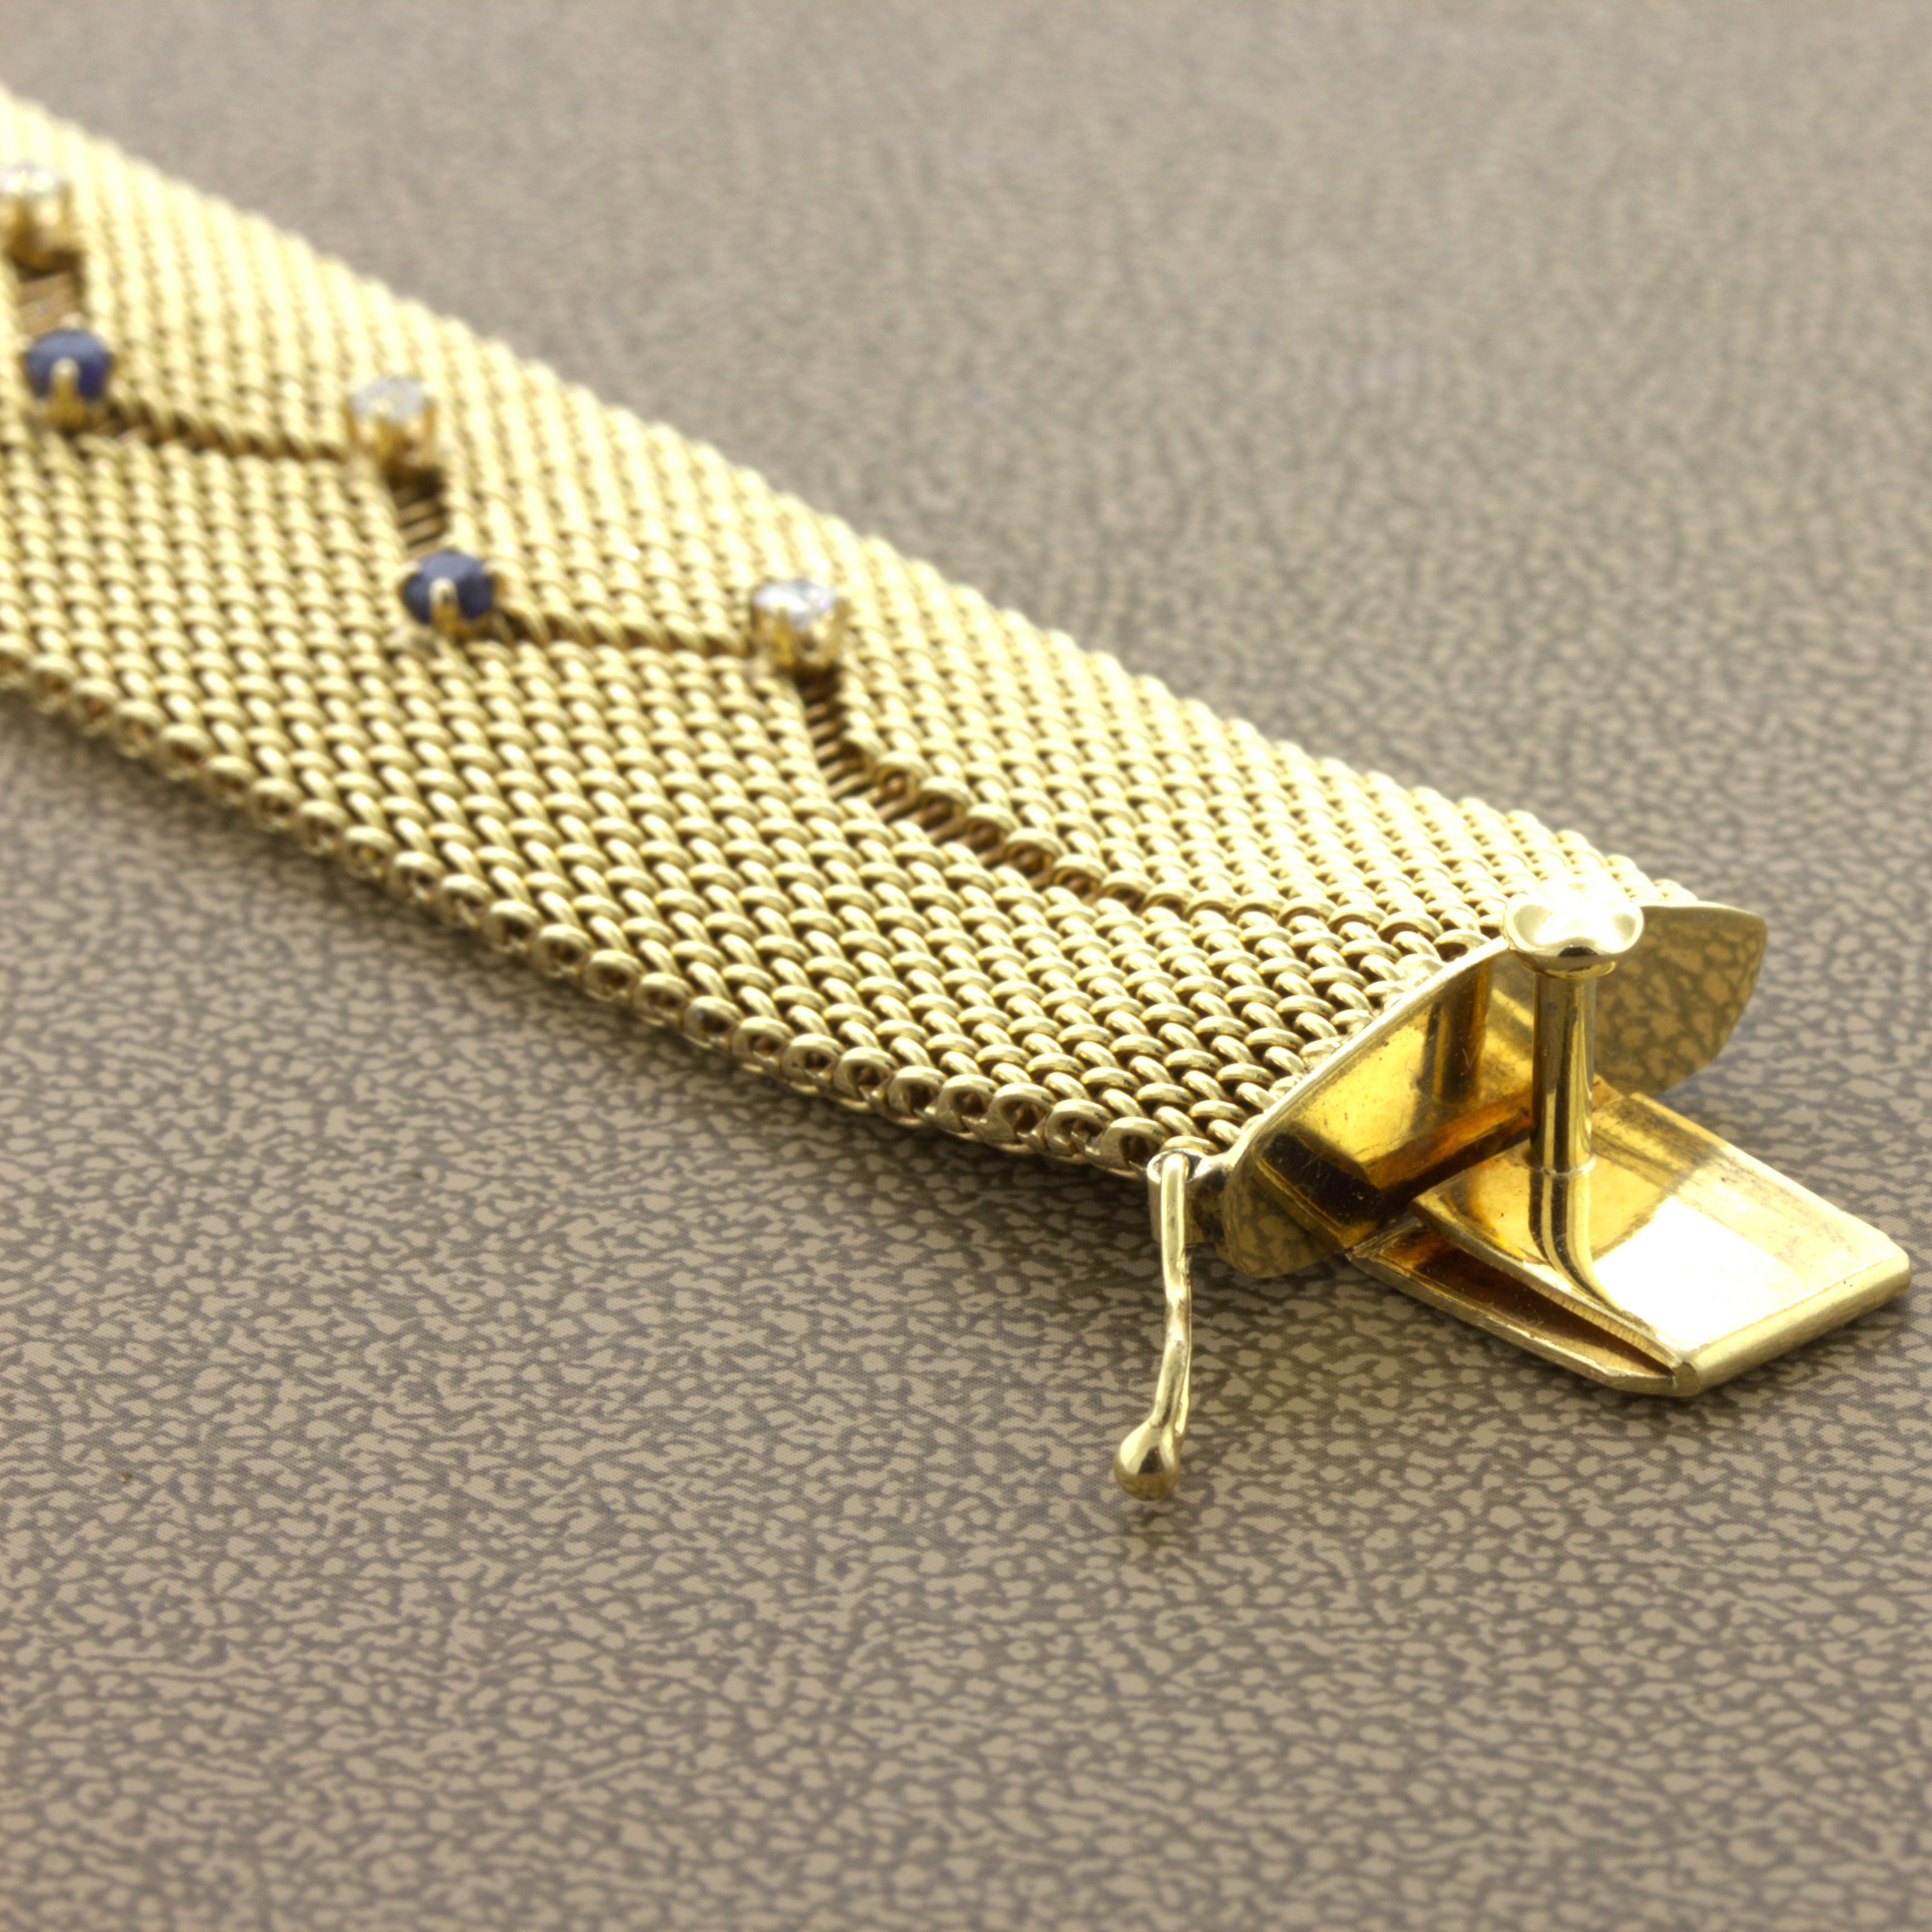 A lovely treasure from the 1940’s! The bracelet features 1 carat of diamond and blue sapphire set in a zigzagging pattern across the piece. It is made in a gold mesh design that has excellent bend and flex allowing it to comfortably rest flat on the